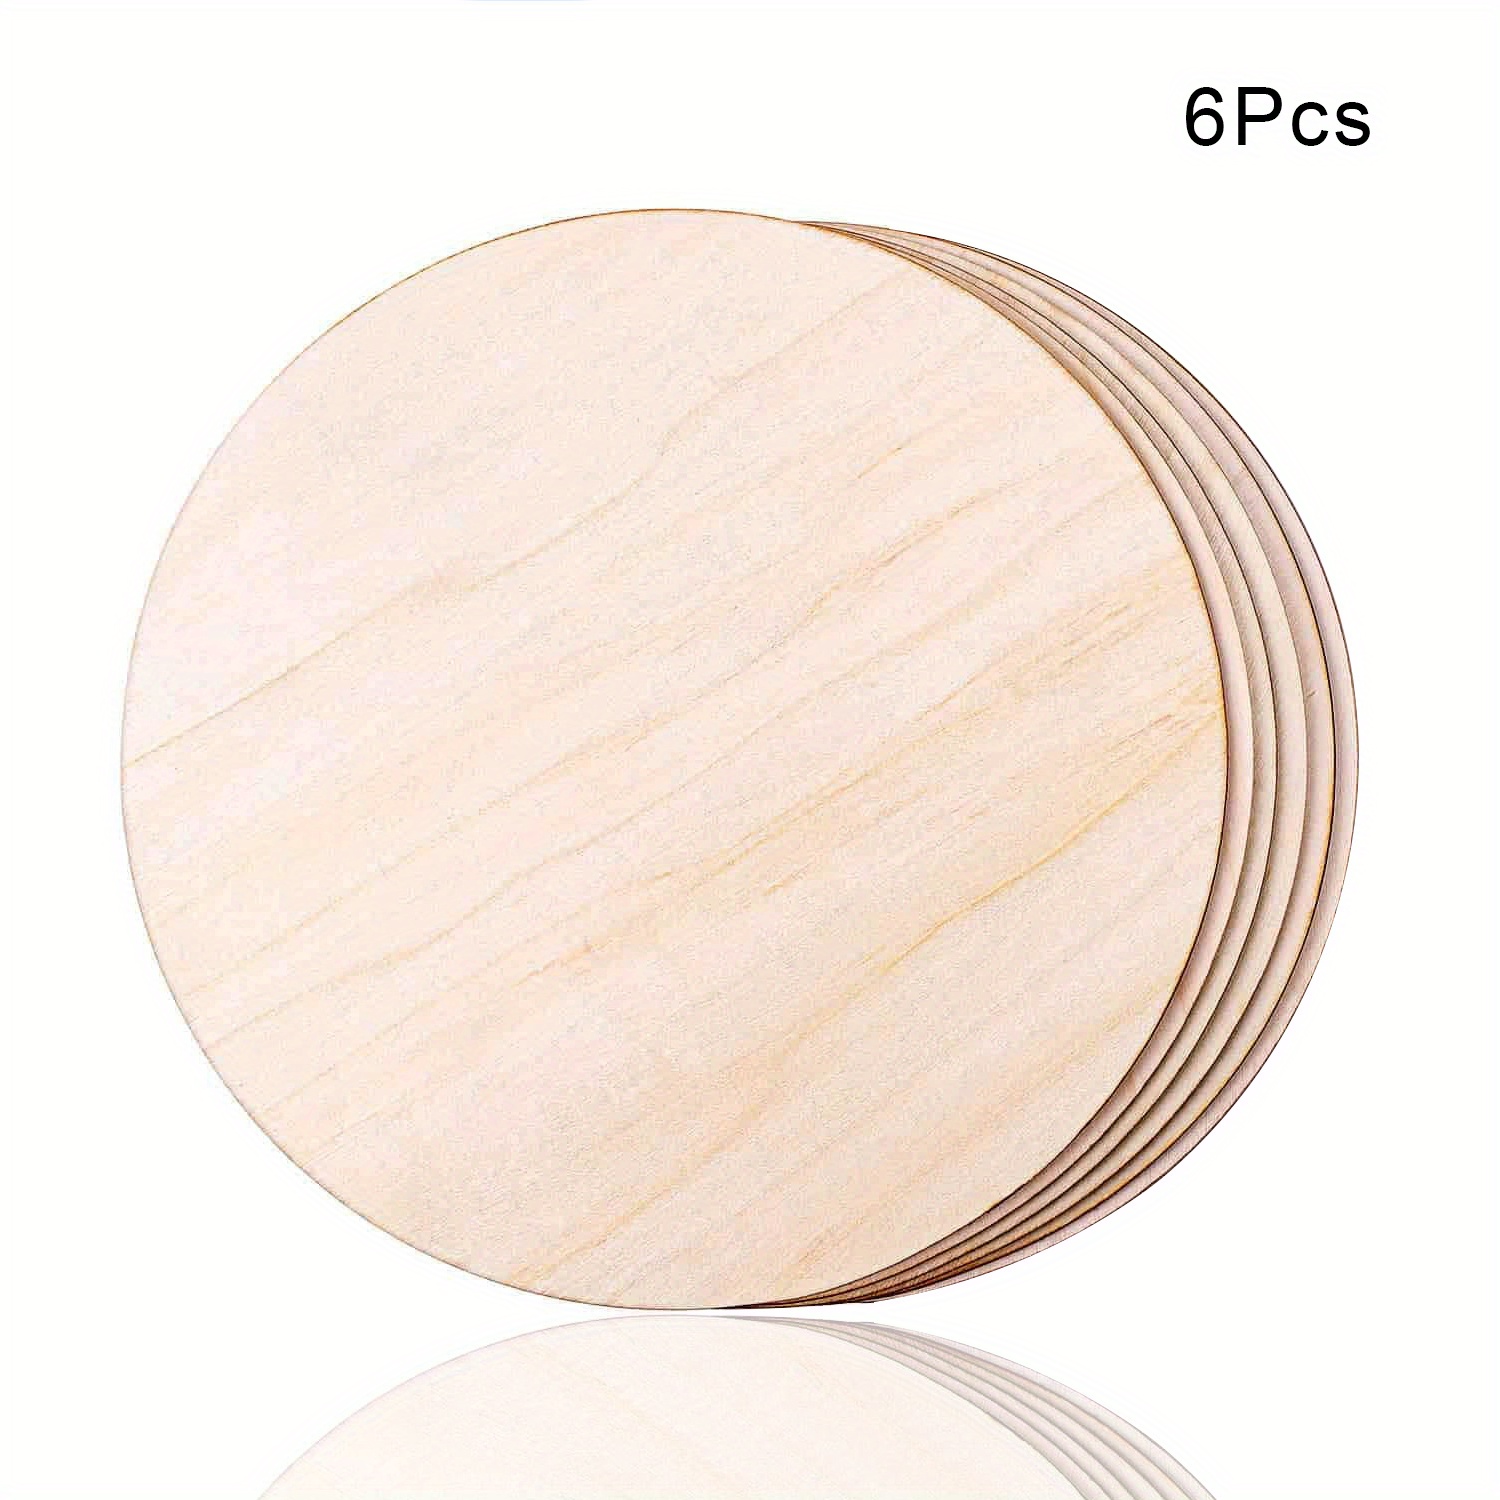  Fuyit Unfinished Wood Circles, 10Pcs 12 Inch Uniform Blank Wood  Rounds Slice Wooden Cutouts with Ribbon & Twine for DIY Crafts, Door  Hanger, Sign, Wood Buring, Painting, Christmas Decor